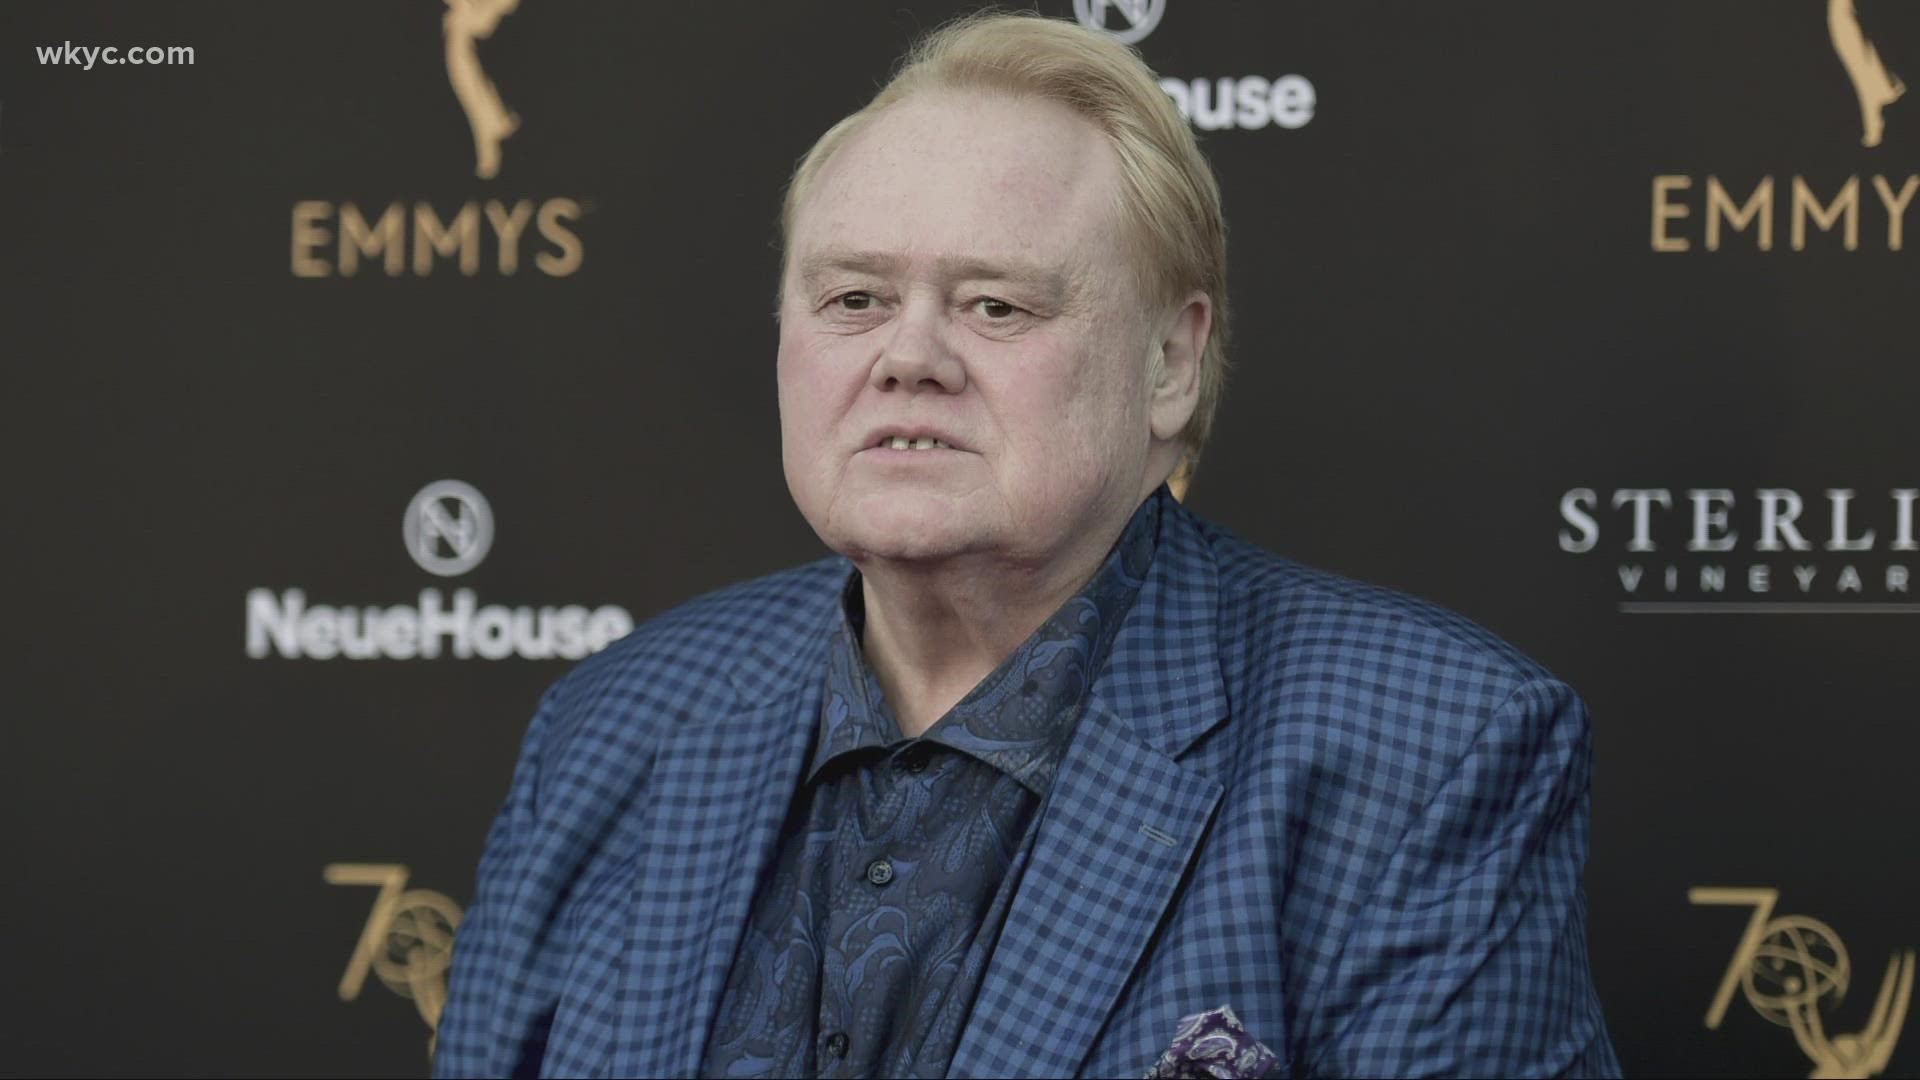 Louie Anderson, Comedian And Award-Winning Actor, Is Dead